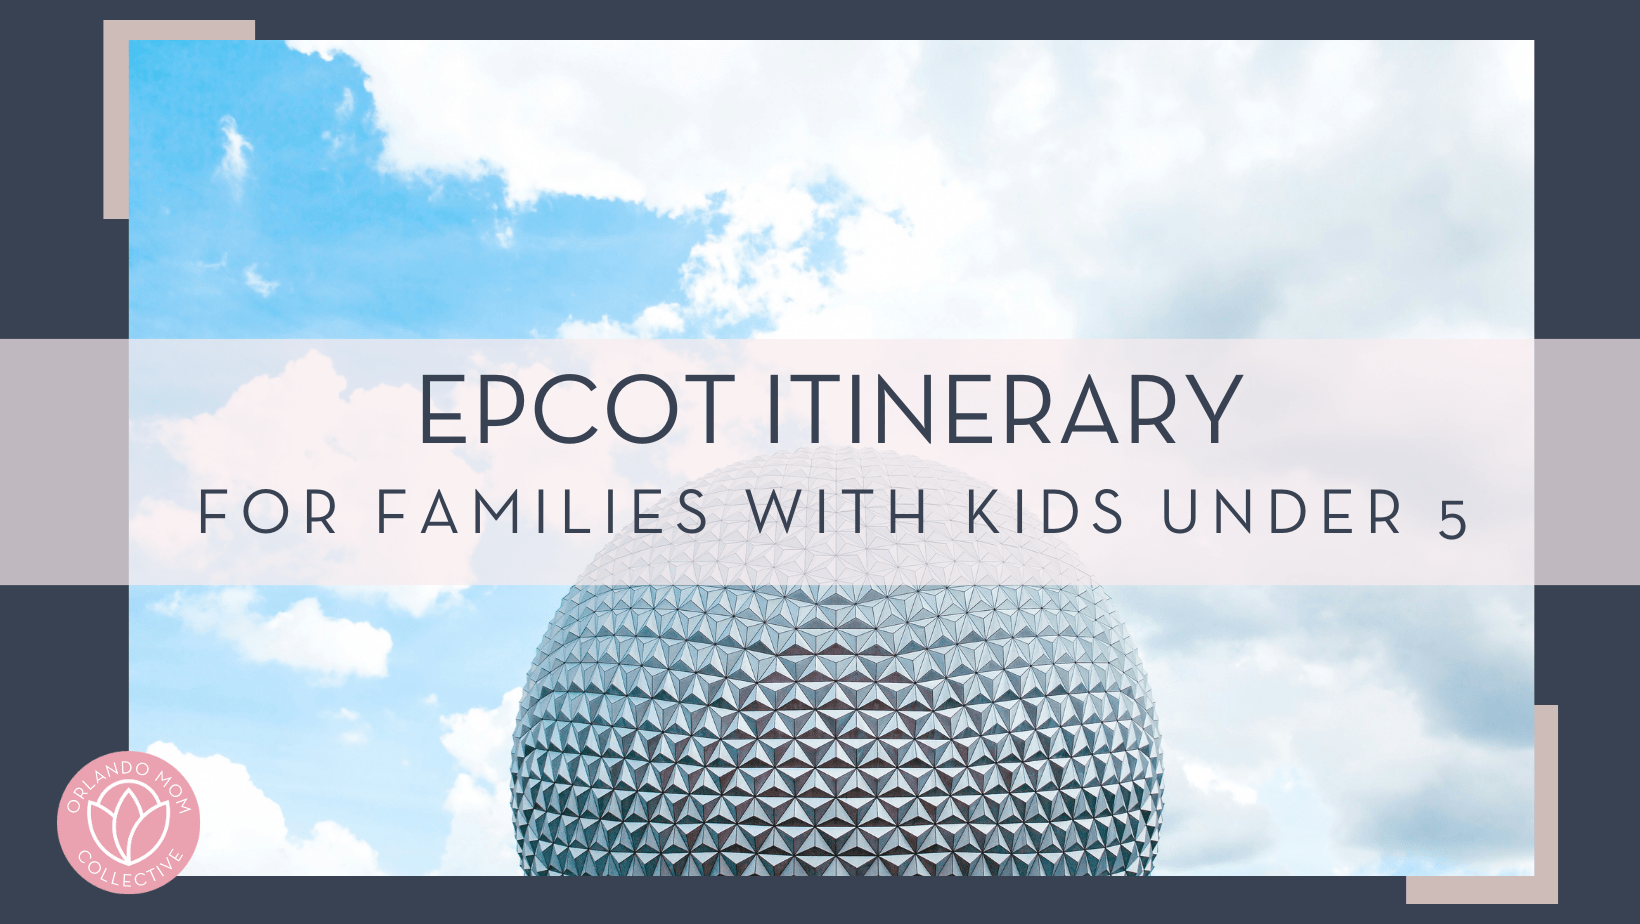 park troopers via unsplash picture of spaceship earth and sunny sky with text 'Epcot itinerary for families with kids under 5' over